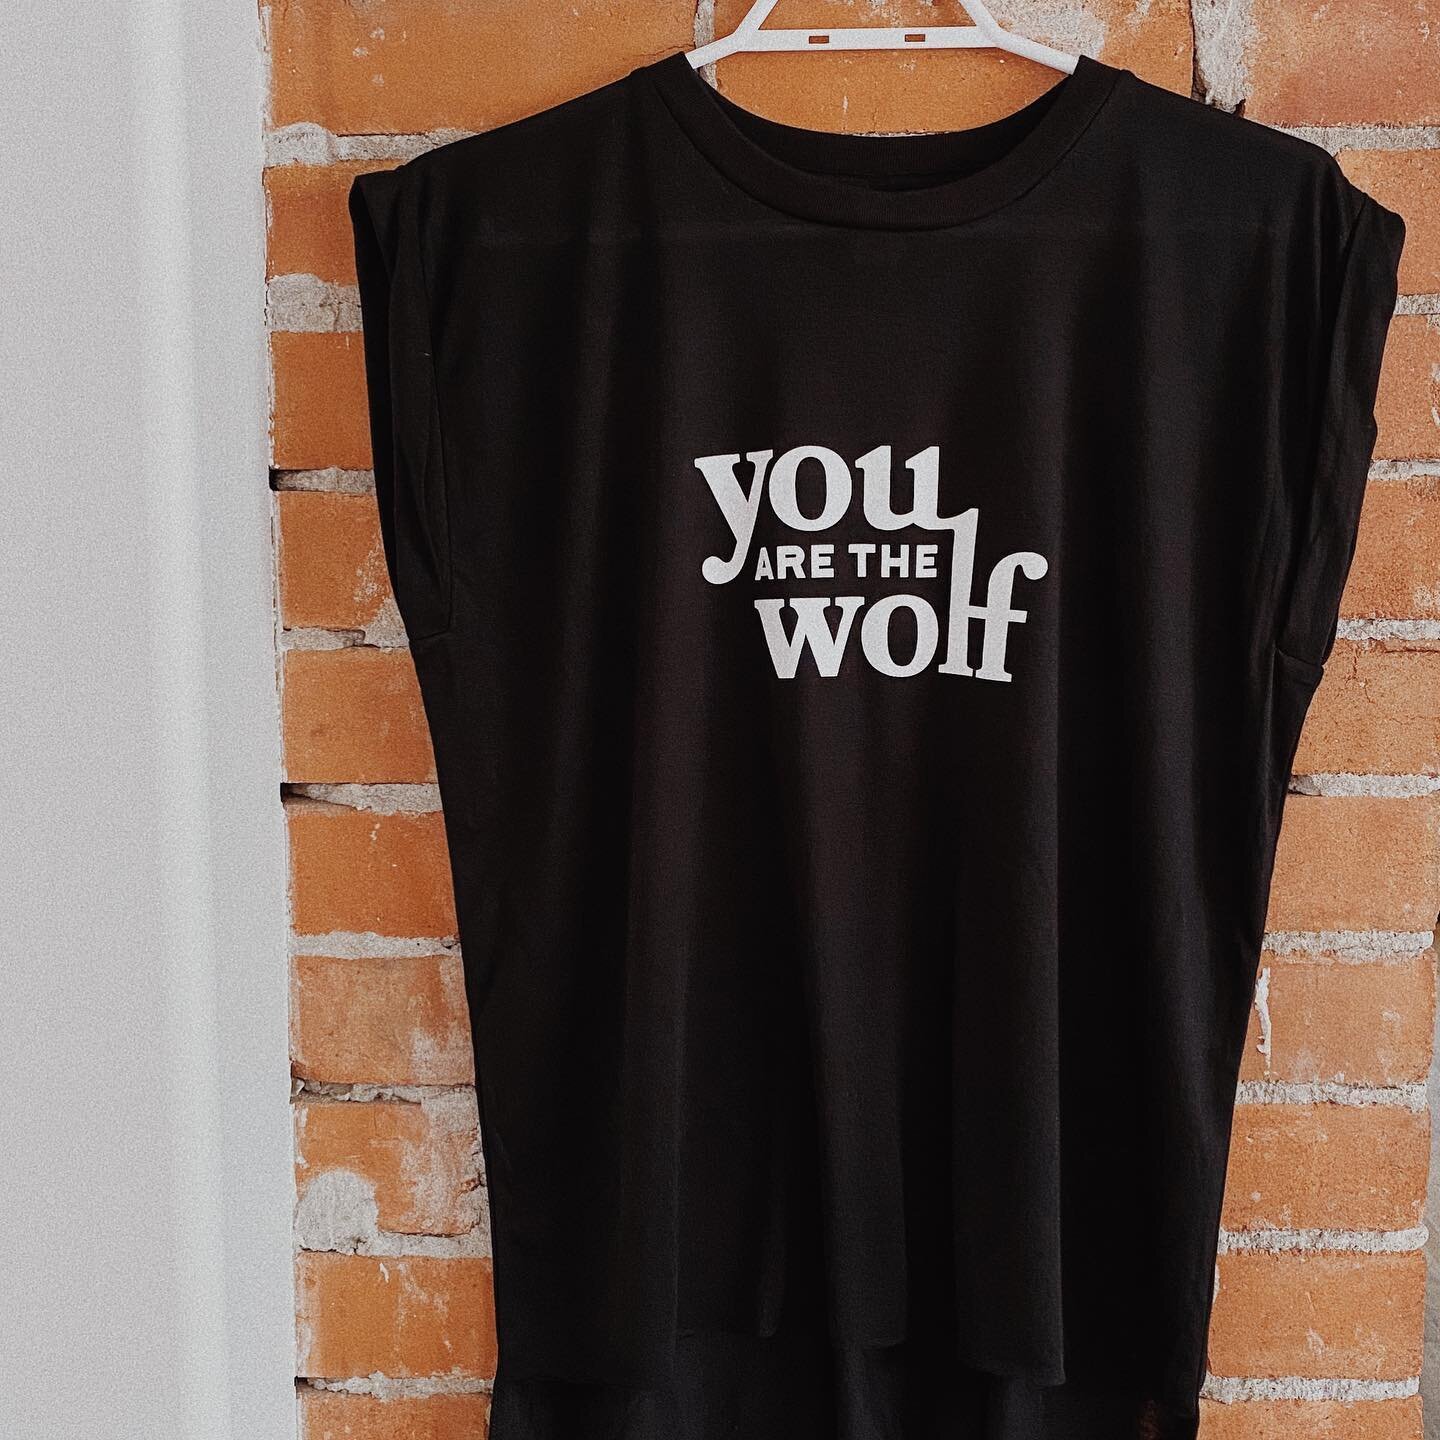 New product alert!!!! Check out these soft and super comfy women&rsquo;s rolled cuff muscle tees with the classic You are the Wolf logo! Screen printed by our friends @matte_black_studio_yyc, this might be one you want to wear daily!